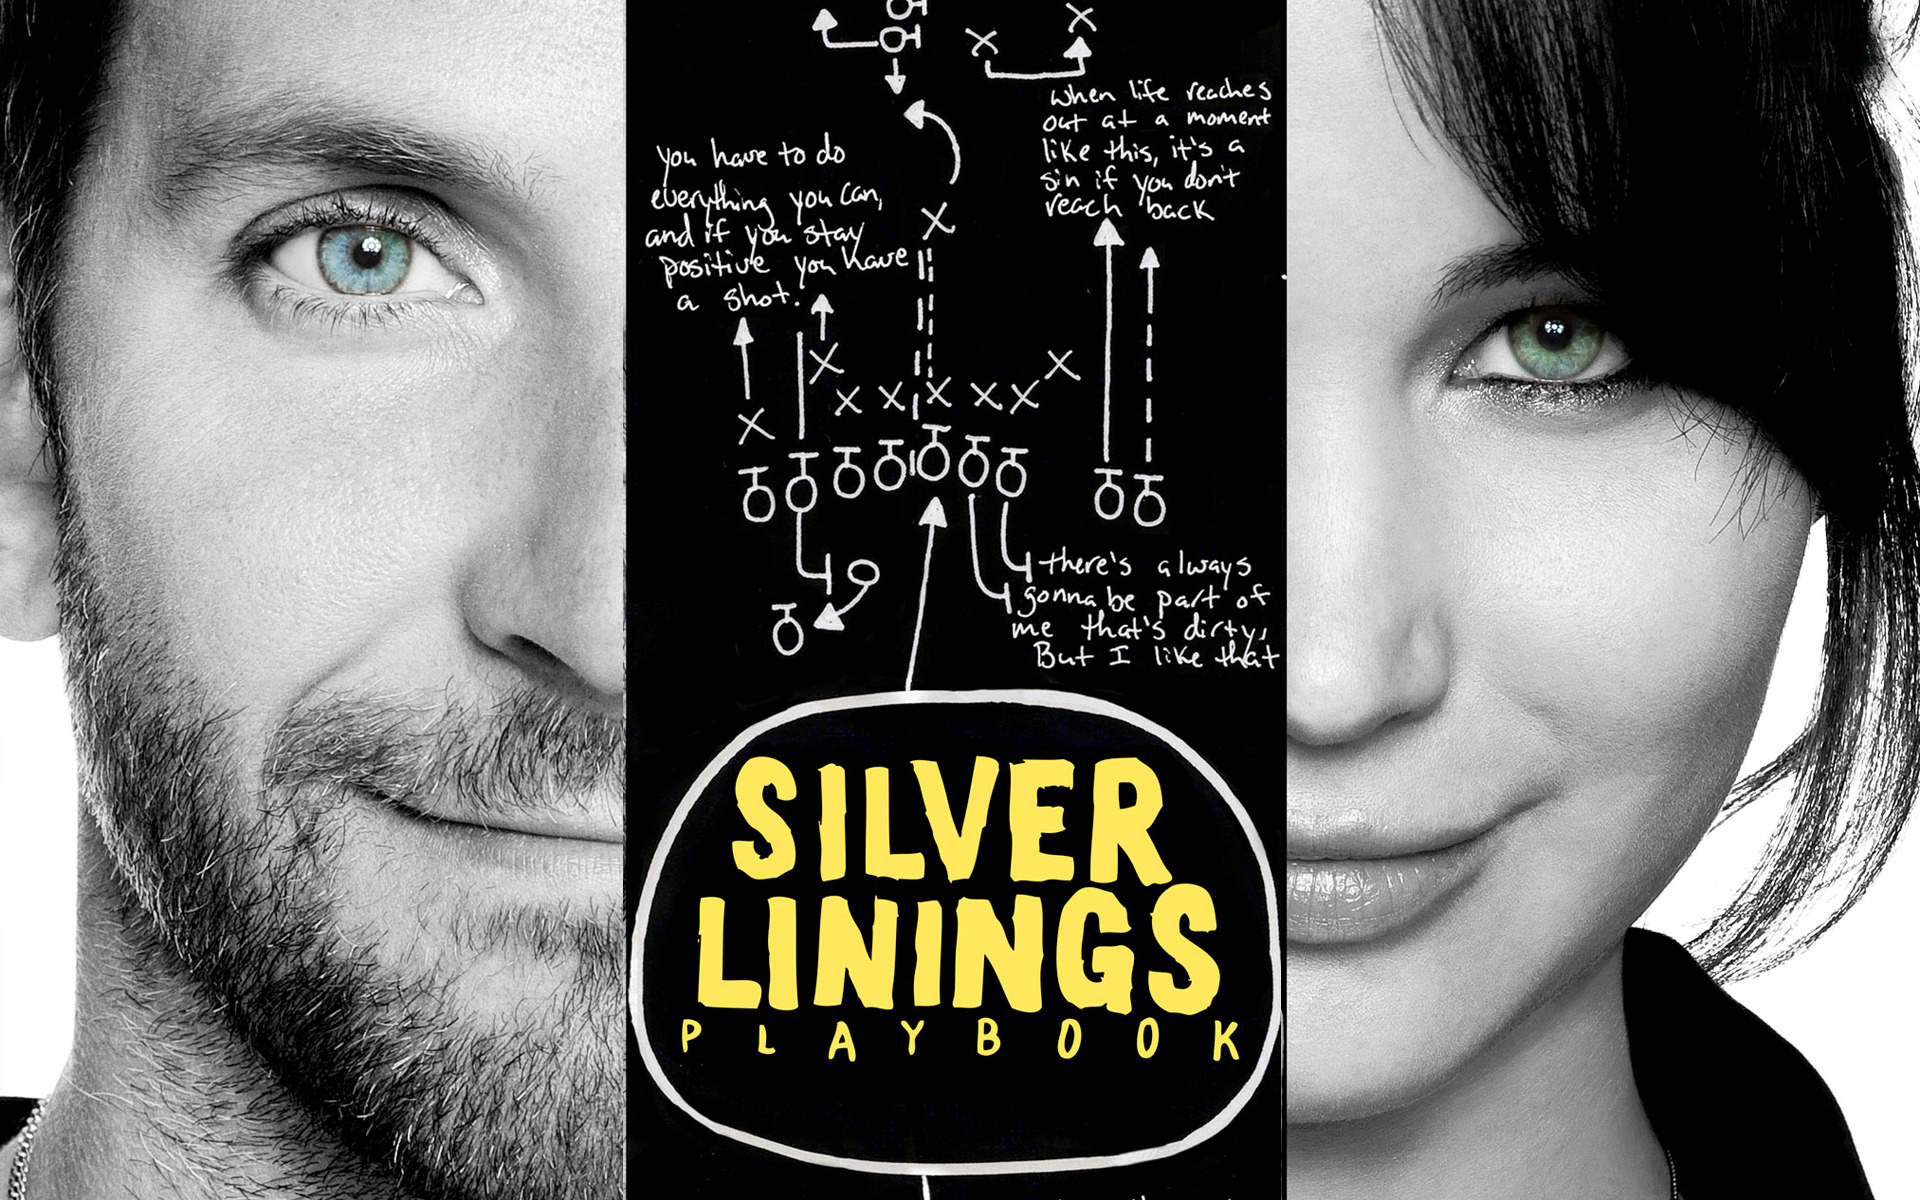 Back 19. The Silver linings playbook.